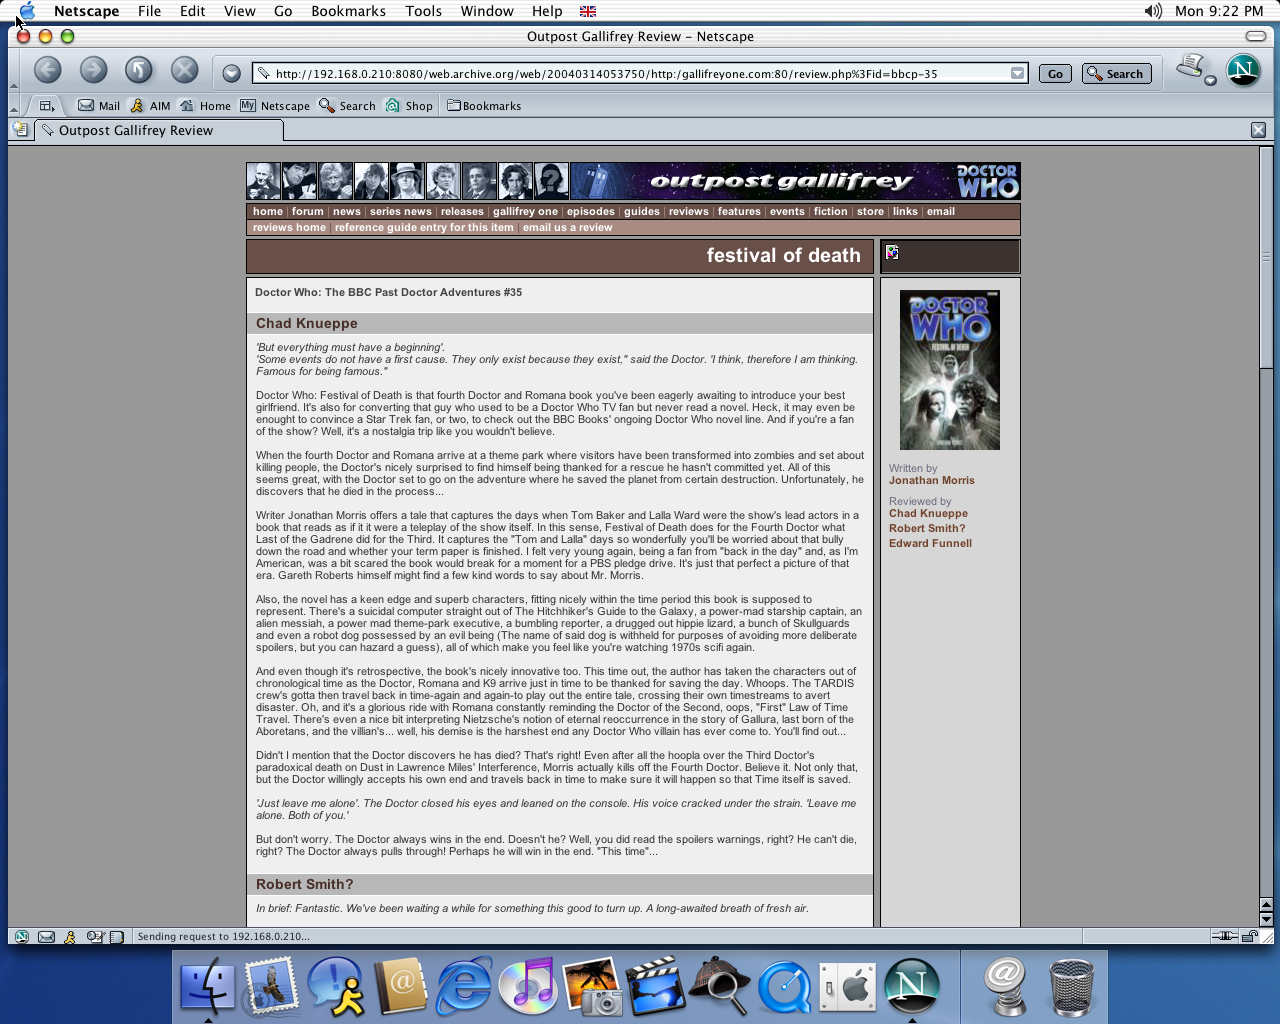 OS X 10.2 PPC with Netscape 7.0 displaying a page from Outpost Gallifrey archived at March 14, 2004 at 05:37:50